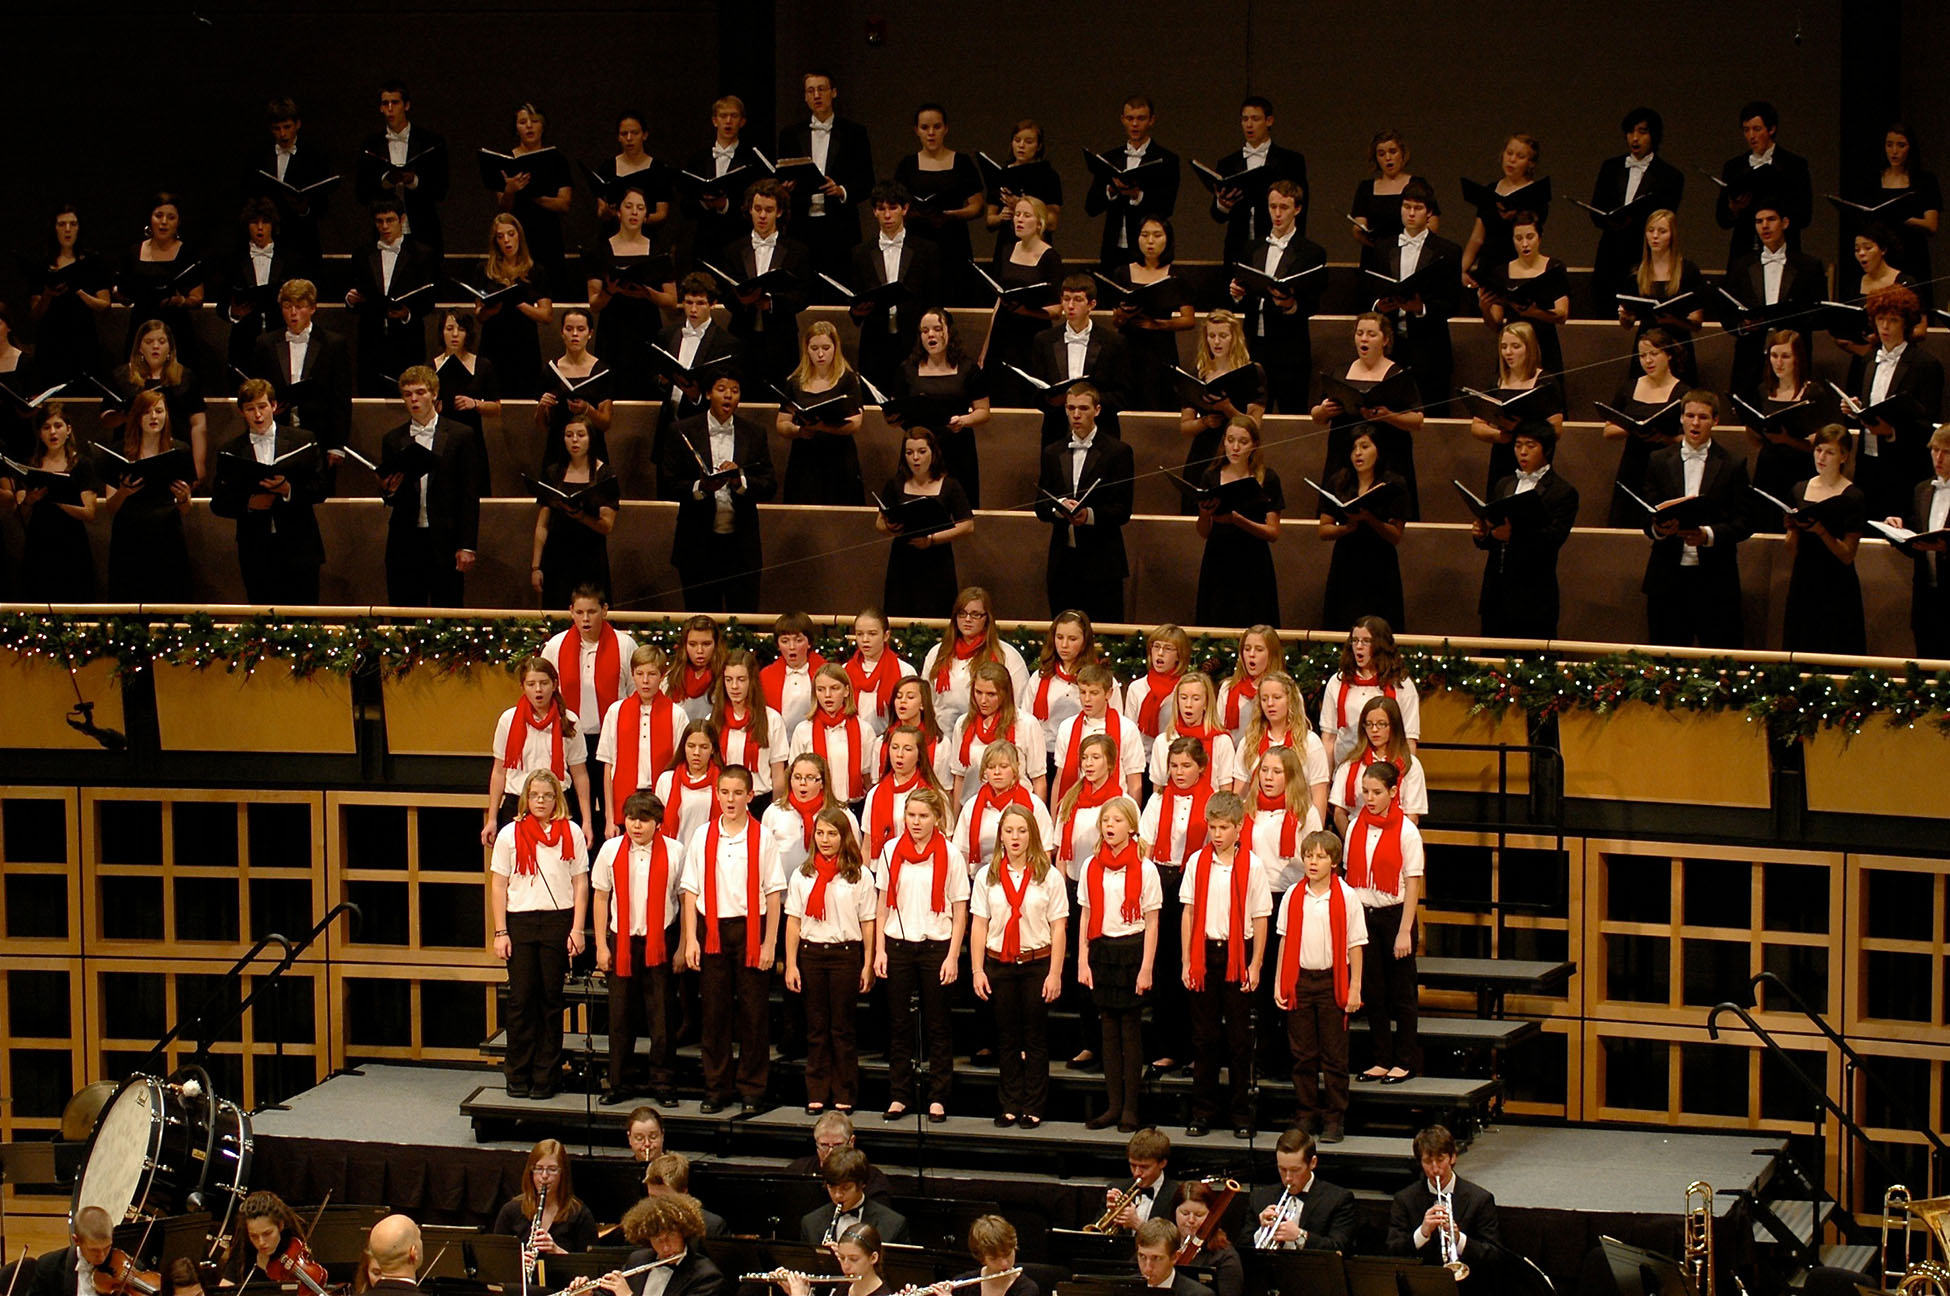 Celebrate Christmas with Goshen College during the ninth annual